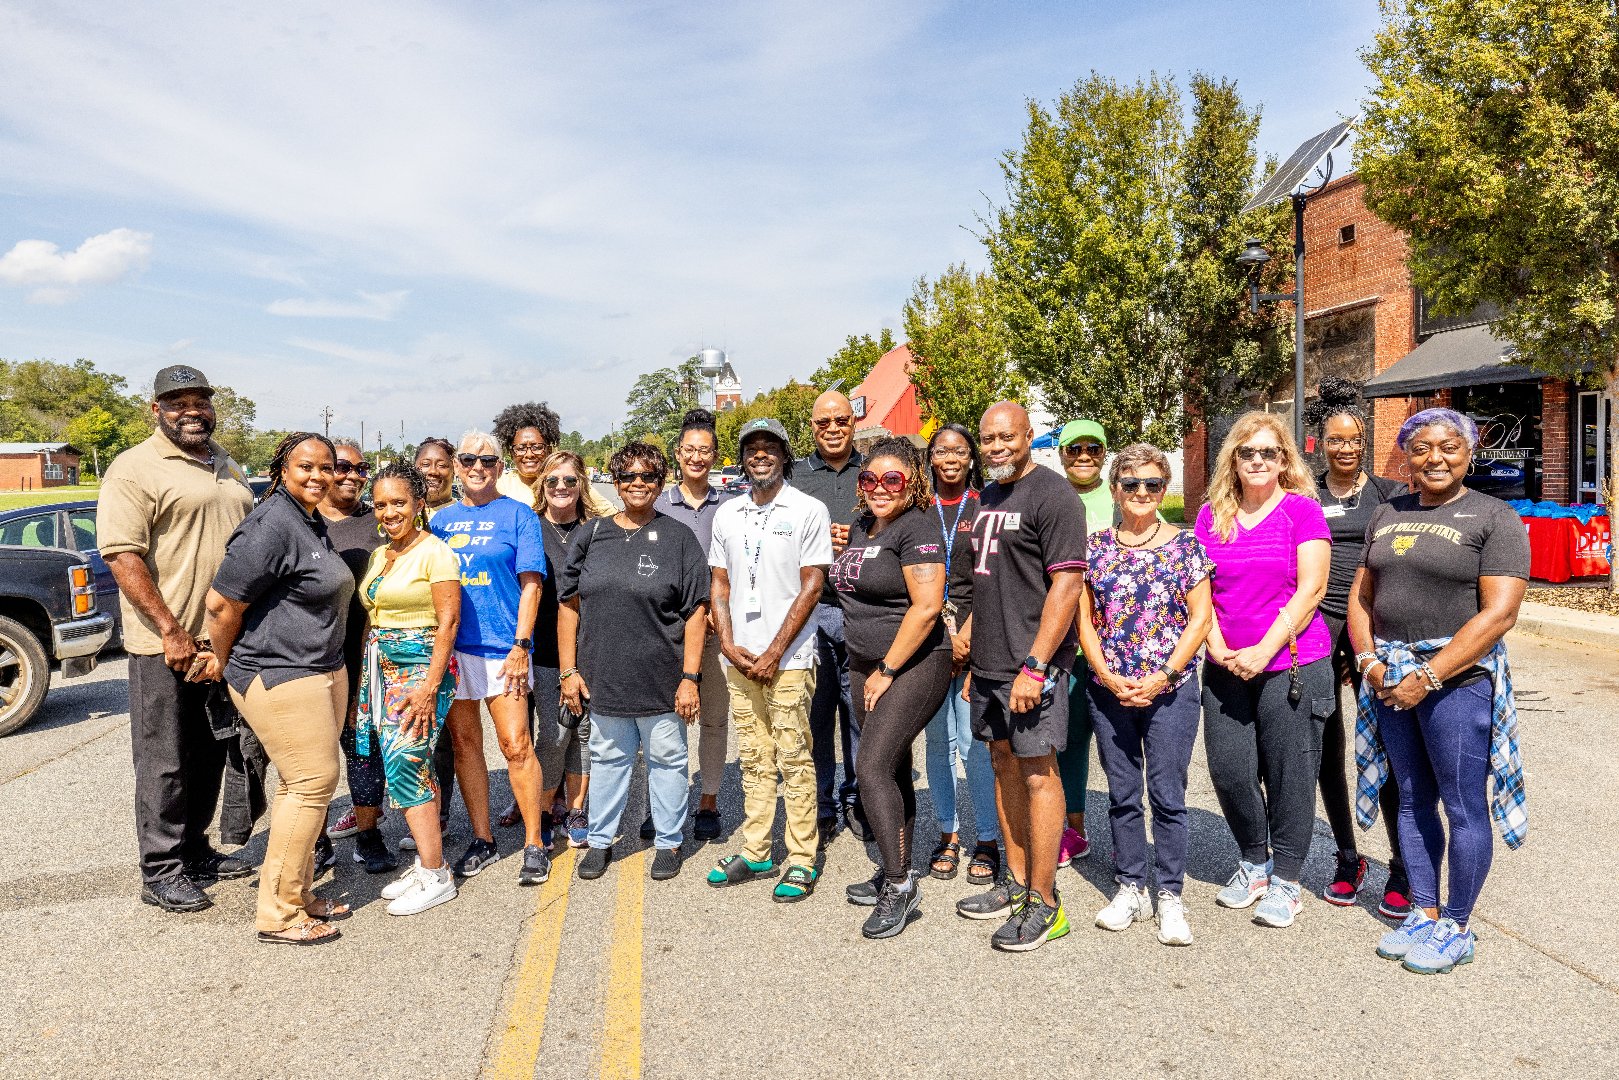 Participants of the Stepping into Fall Walkathon pose as a group in Jeffersonville, Georgia.